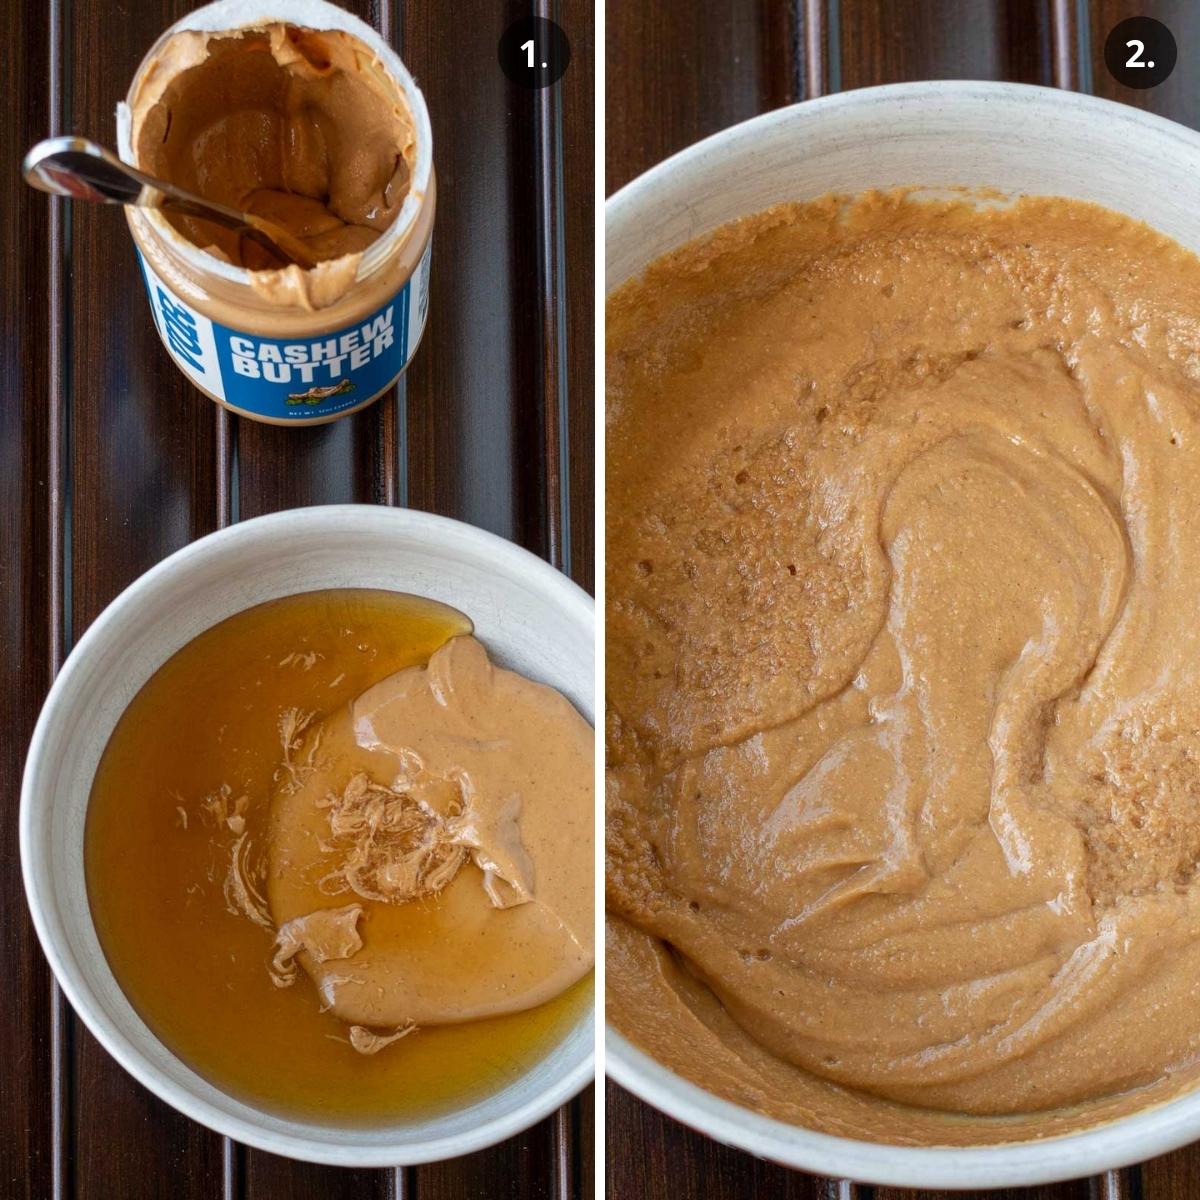 Cashew butter and maple syrup before and after heated in microwave.